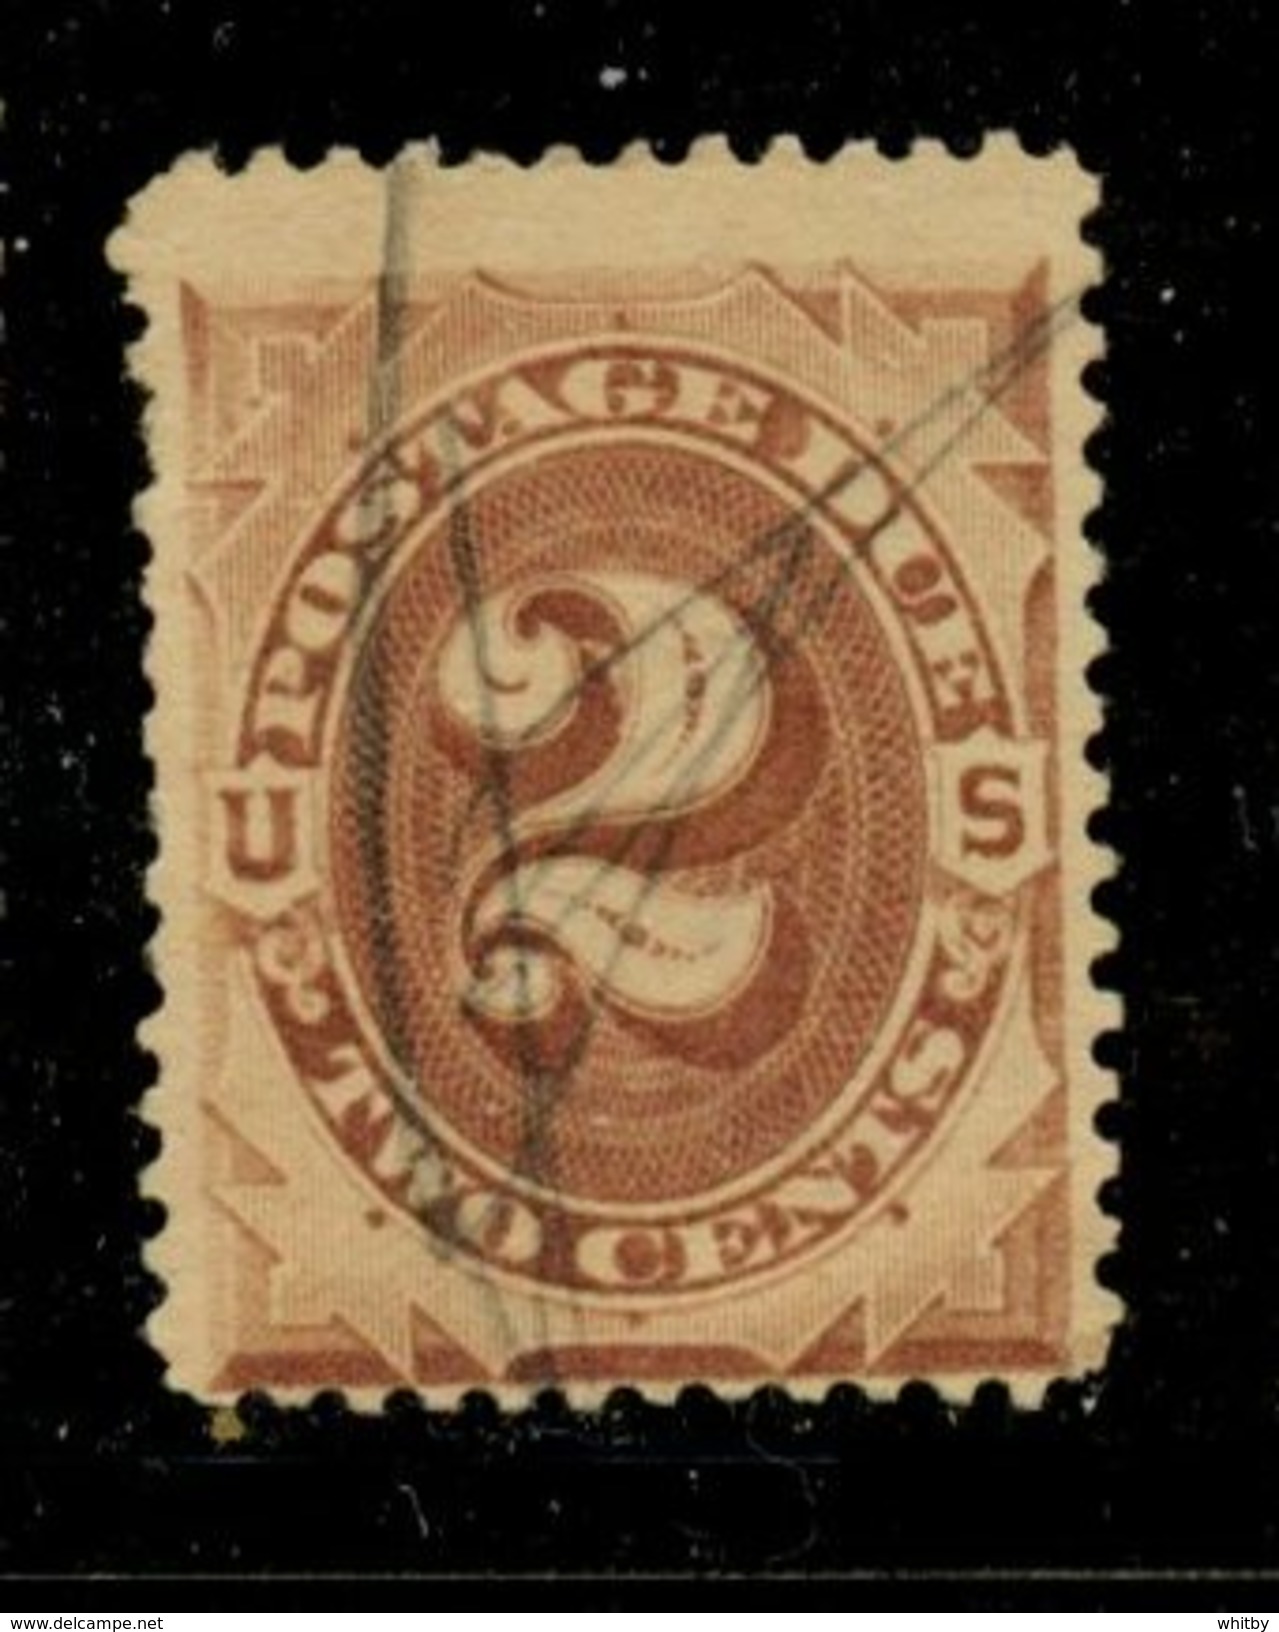 USA 1879 2 Cent Postage Due Issue #J2  Used - Postage Due